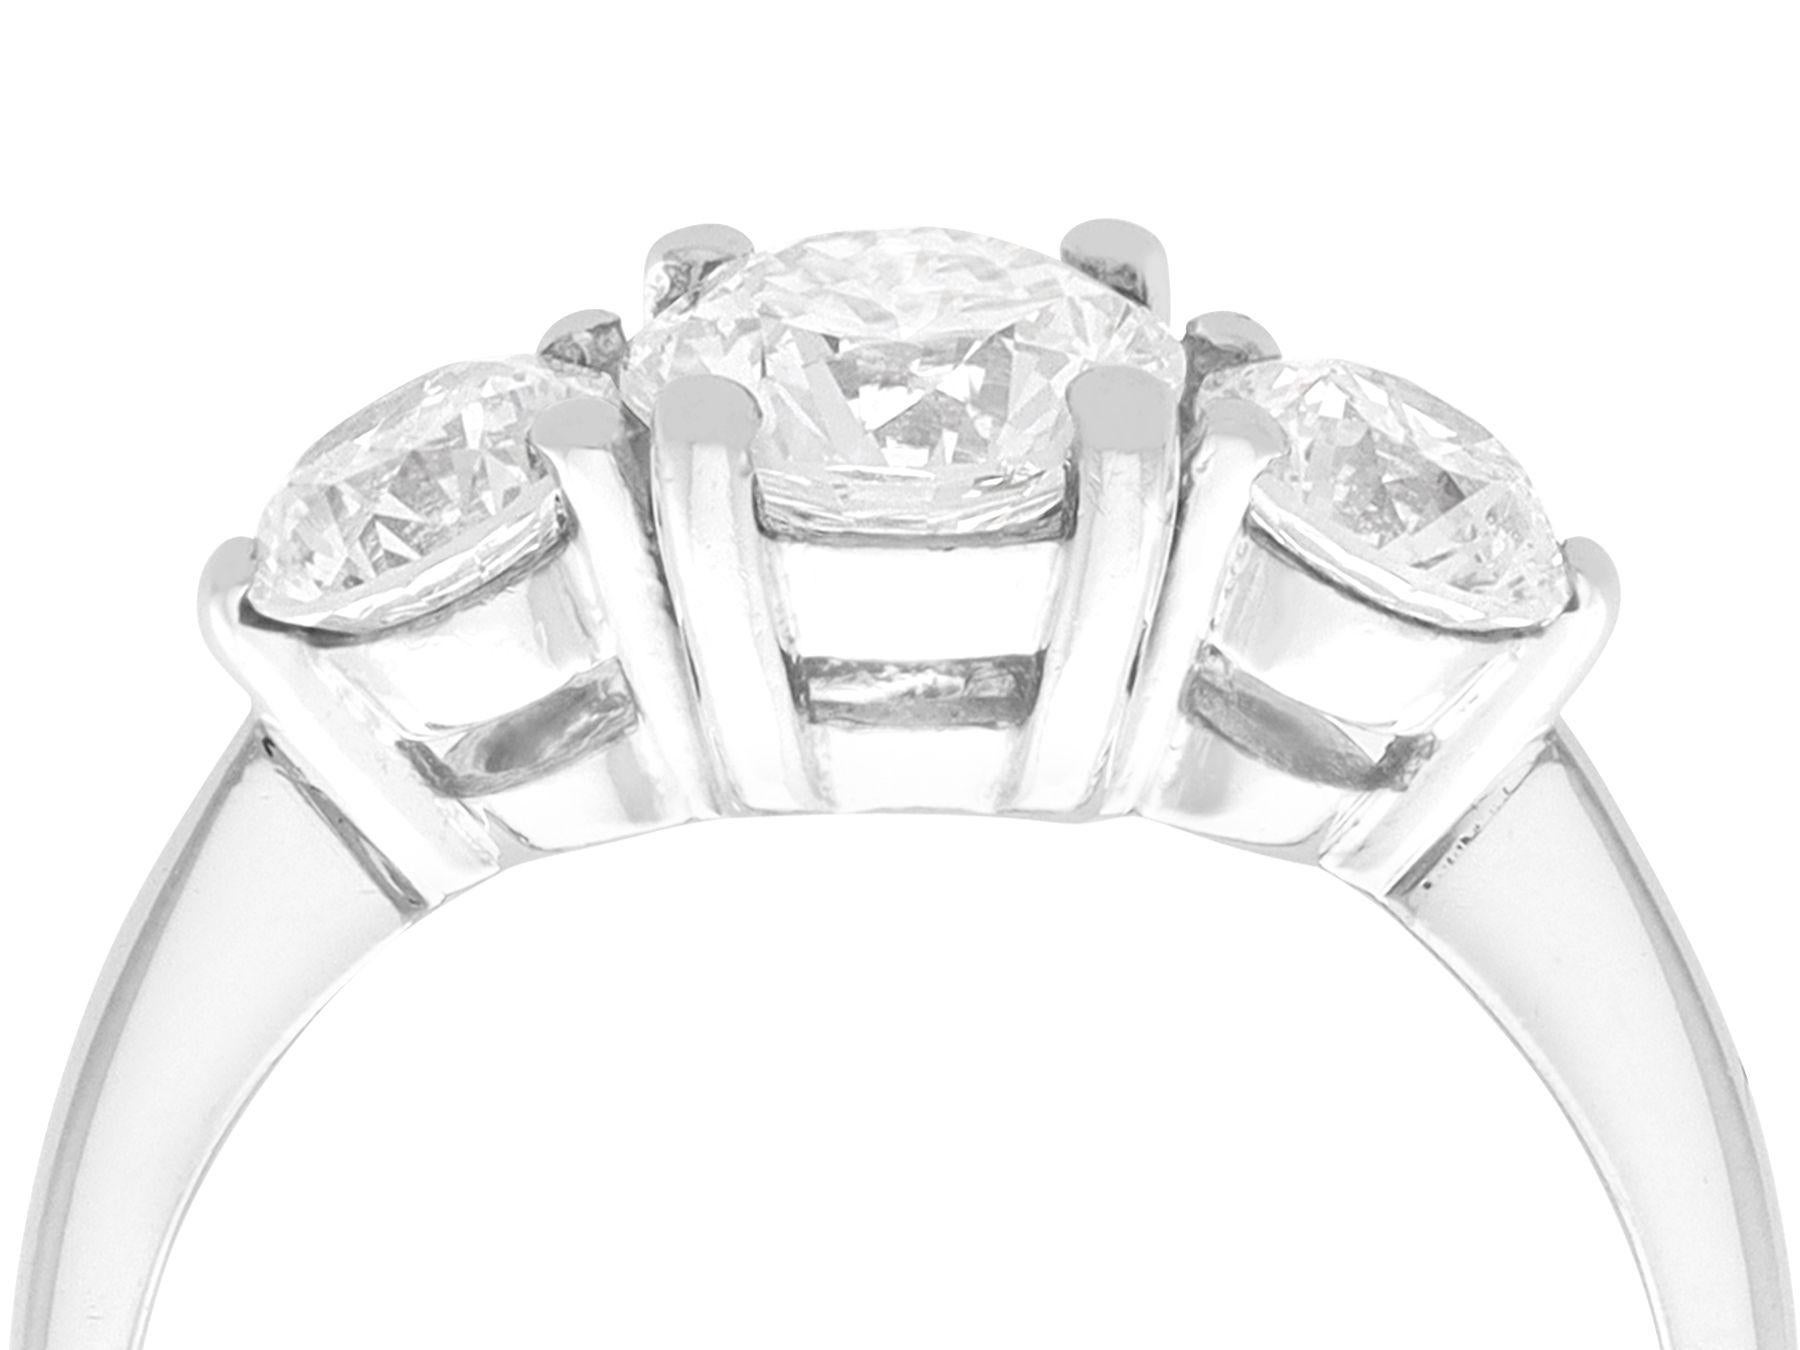 A stunning, fine and impressive contemporary platinum trilogy ring set with 1.81 carats of vintage (circa 1940) diamonds; part of our diverse diamond jewellery and estate jewelry collections.

This stunning, fine and impressive diamond trilogy ring